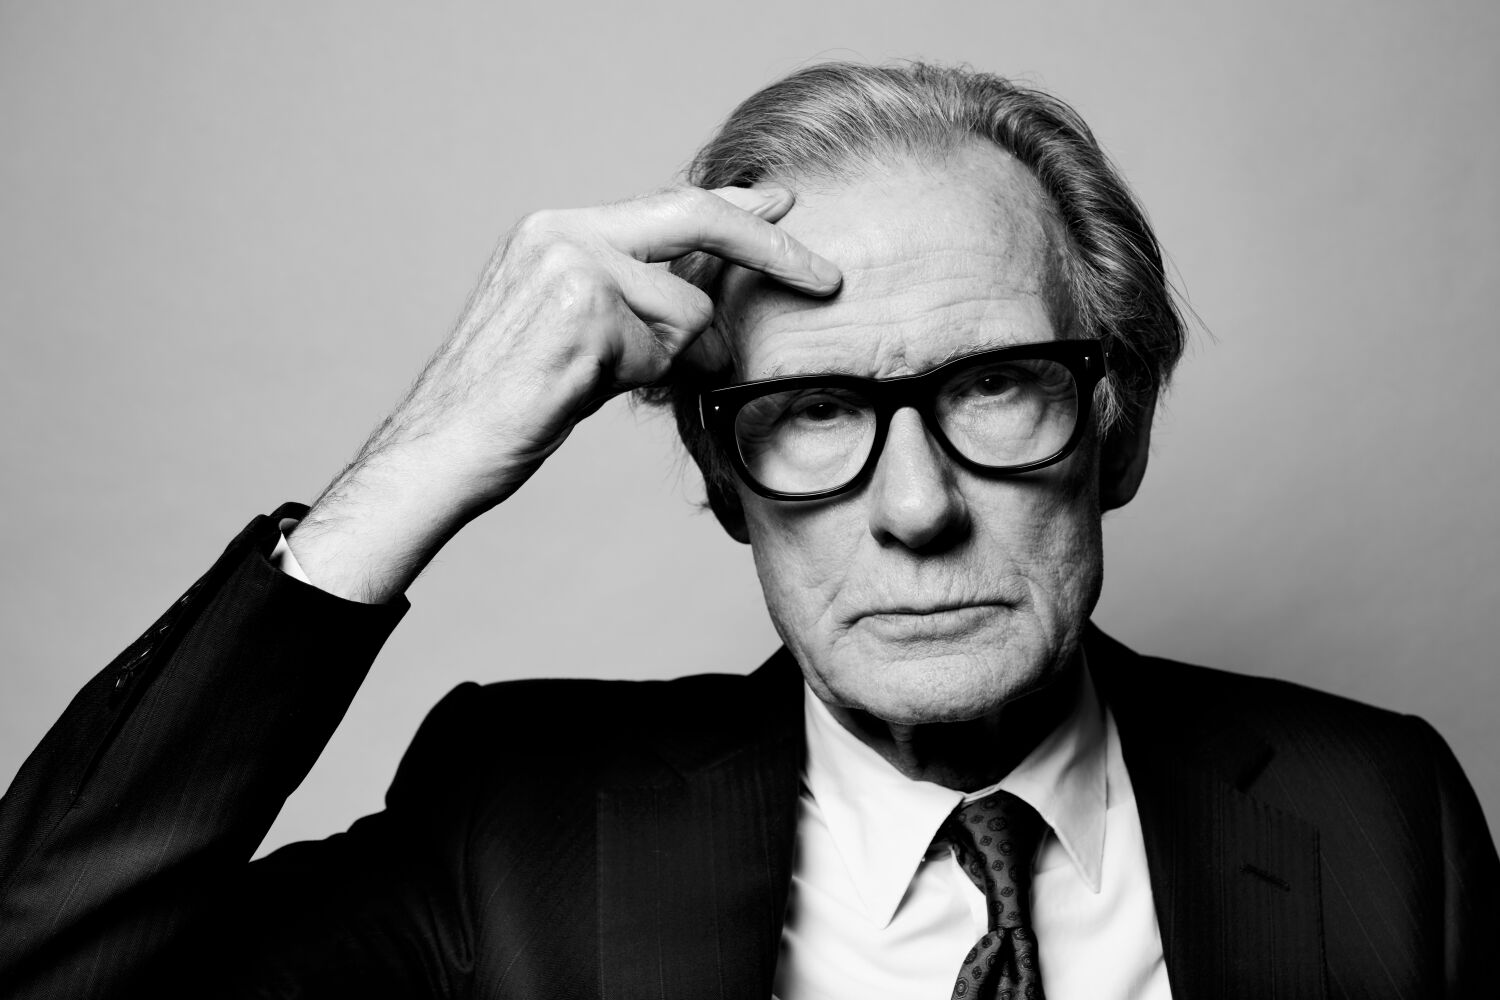 Death? Bill Nighy will worry about that later